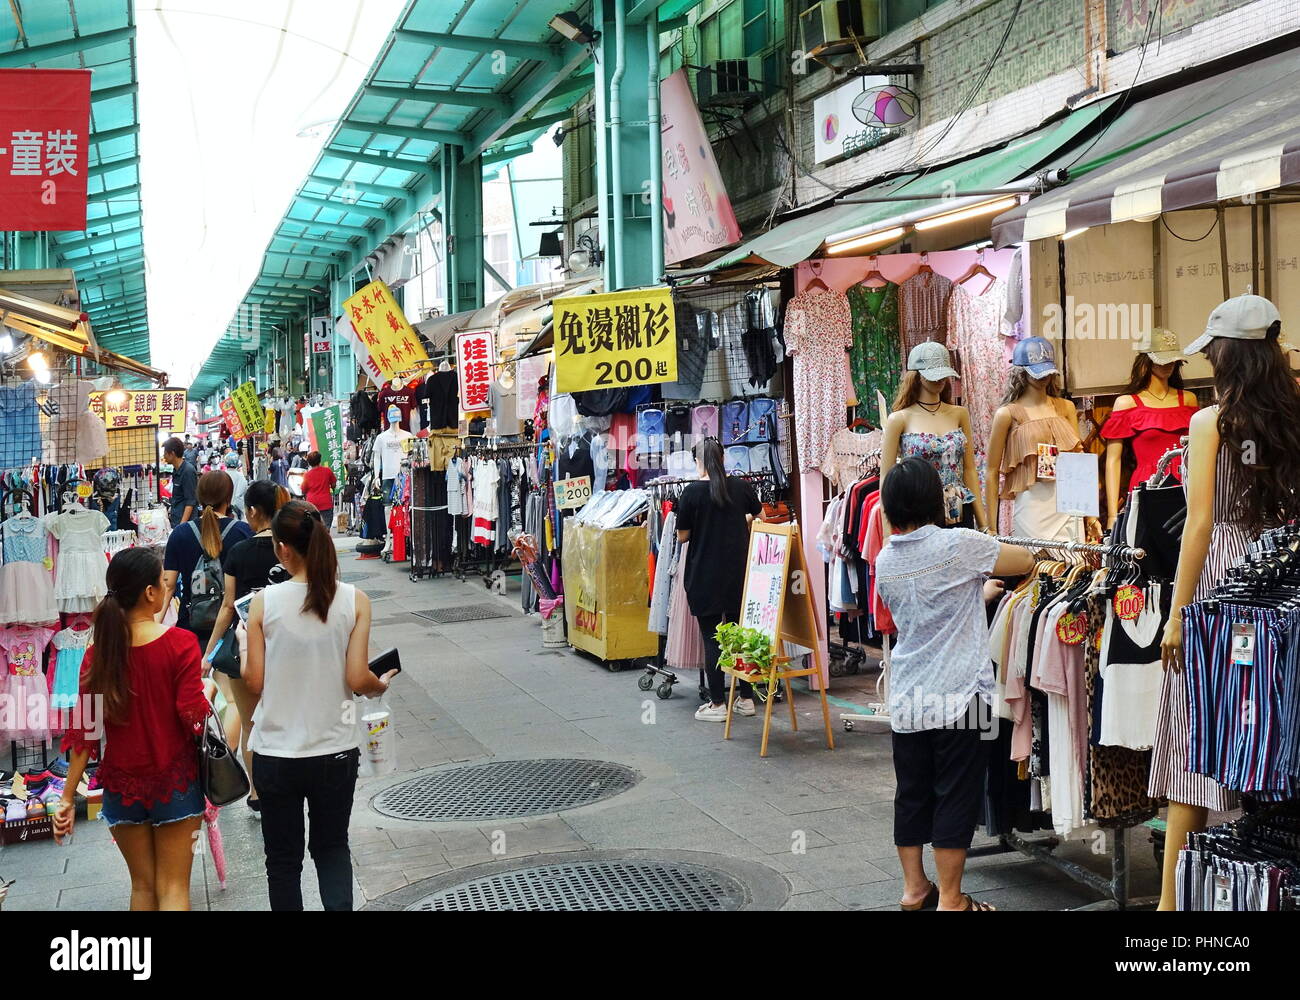 KAOHSIUNG, TAIWAN -- AUGUST 18, 2018: The Nan Hua tourist market sells mainly affordable clothing and shoes for cildren and young people. Stock Photo